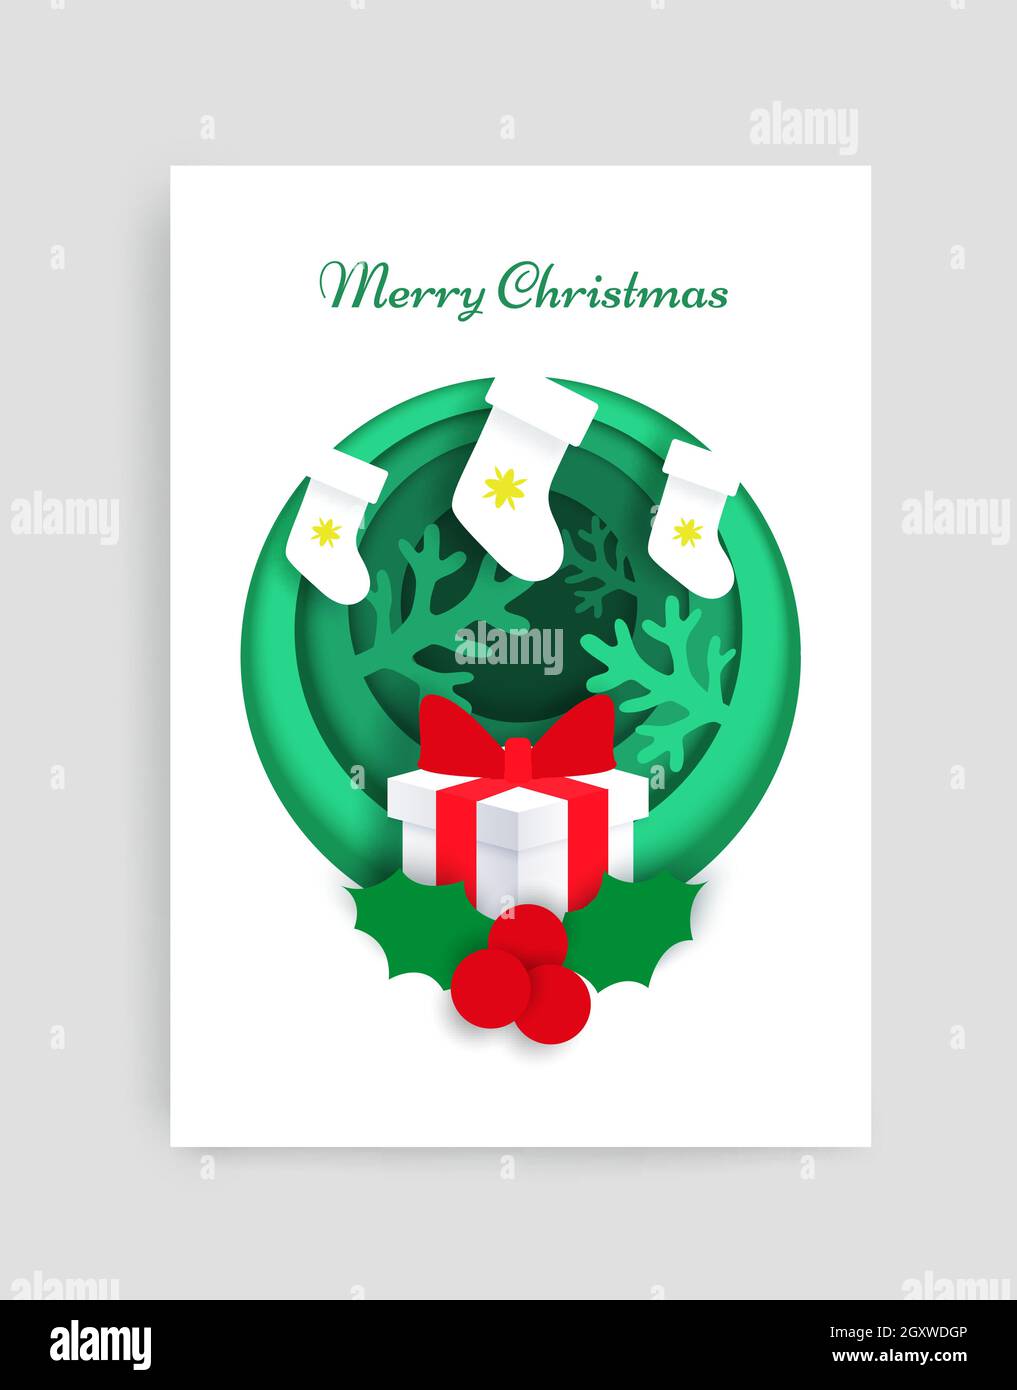 Merry Christmas card vector design template. Paper cut craft style Christmas socks, gift box, holly berries in circle. Stock Vector